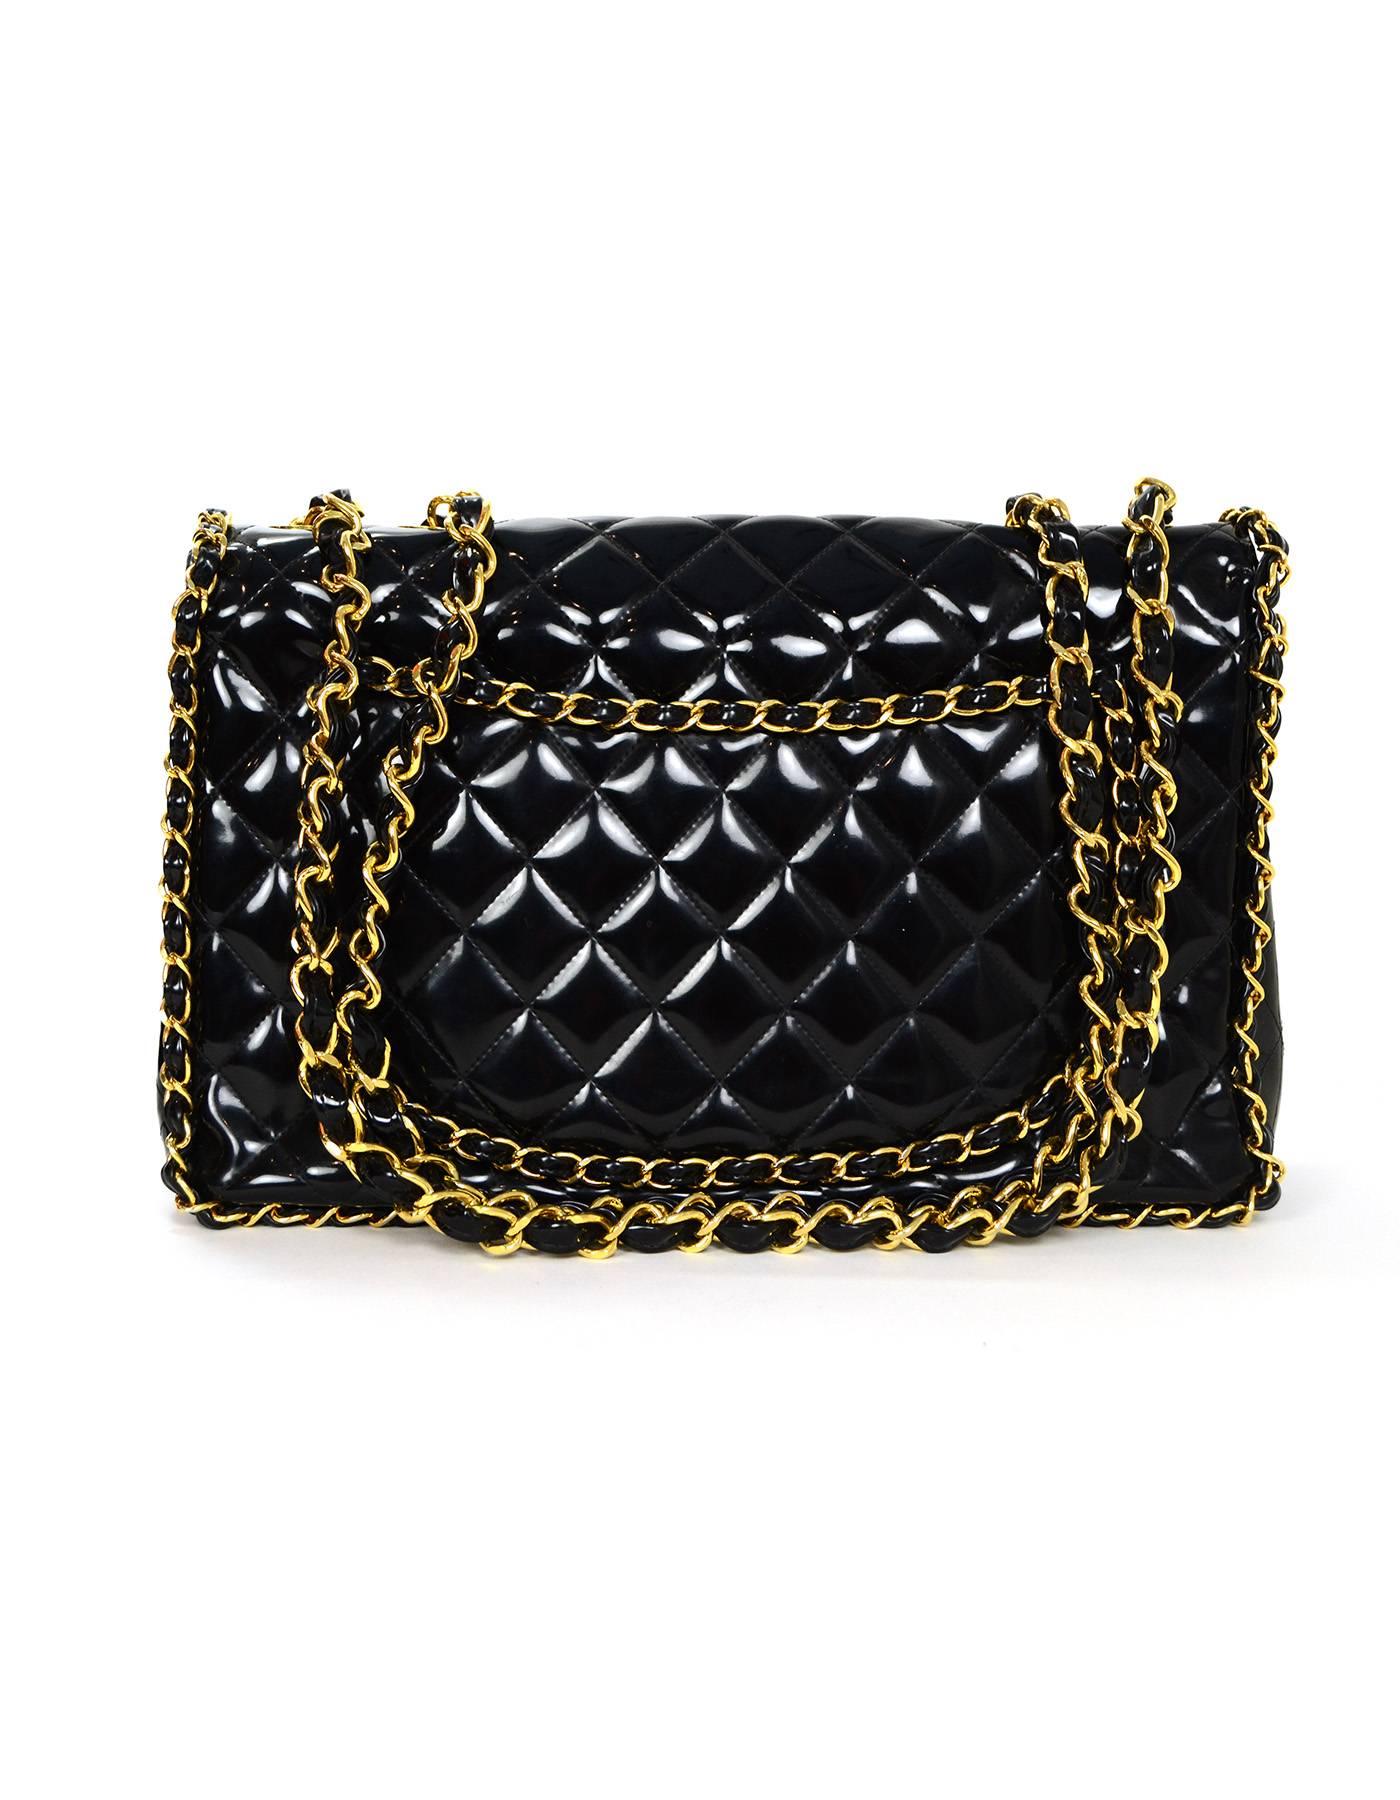 Chanel Vintage Black Patent Leather Chain Around Maxi Flap Bag.  Features classic CC twist lock and quilting with patent laced chain around border and back pocket of bag.  Strap can be worn doubled on the shoulder, or singled as a crossbody.

Made